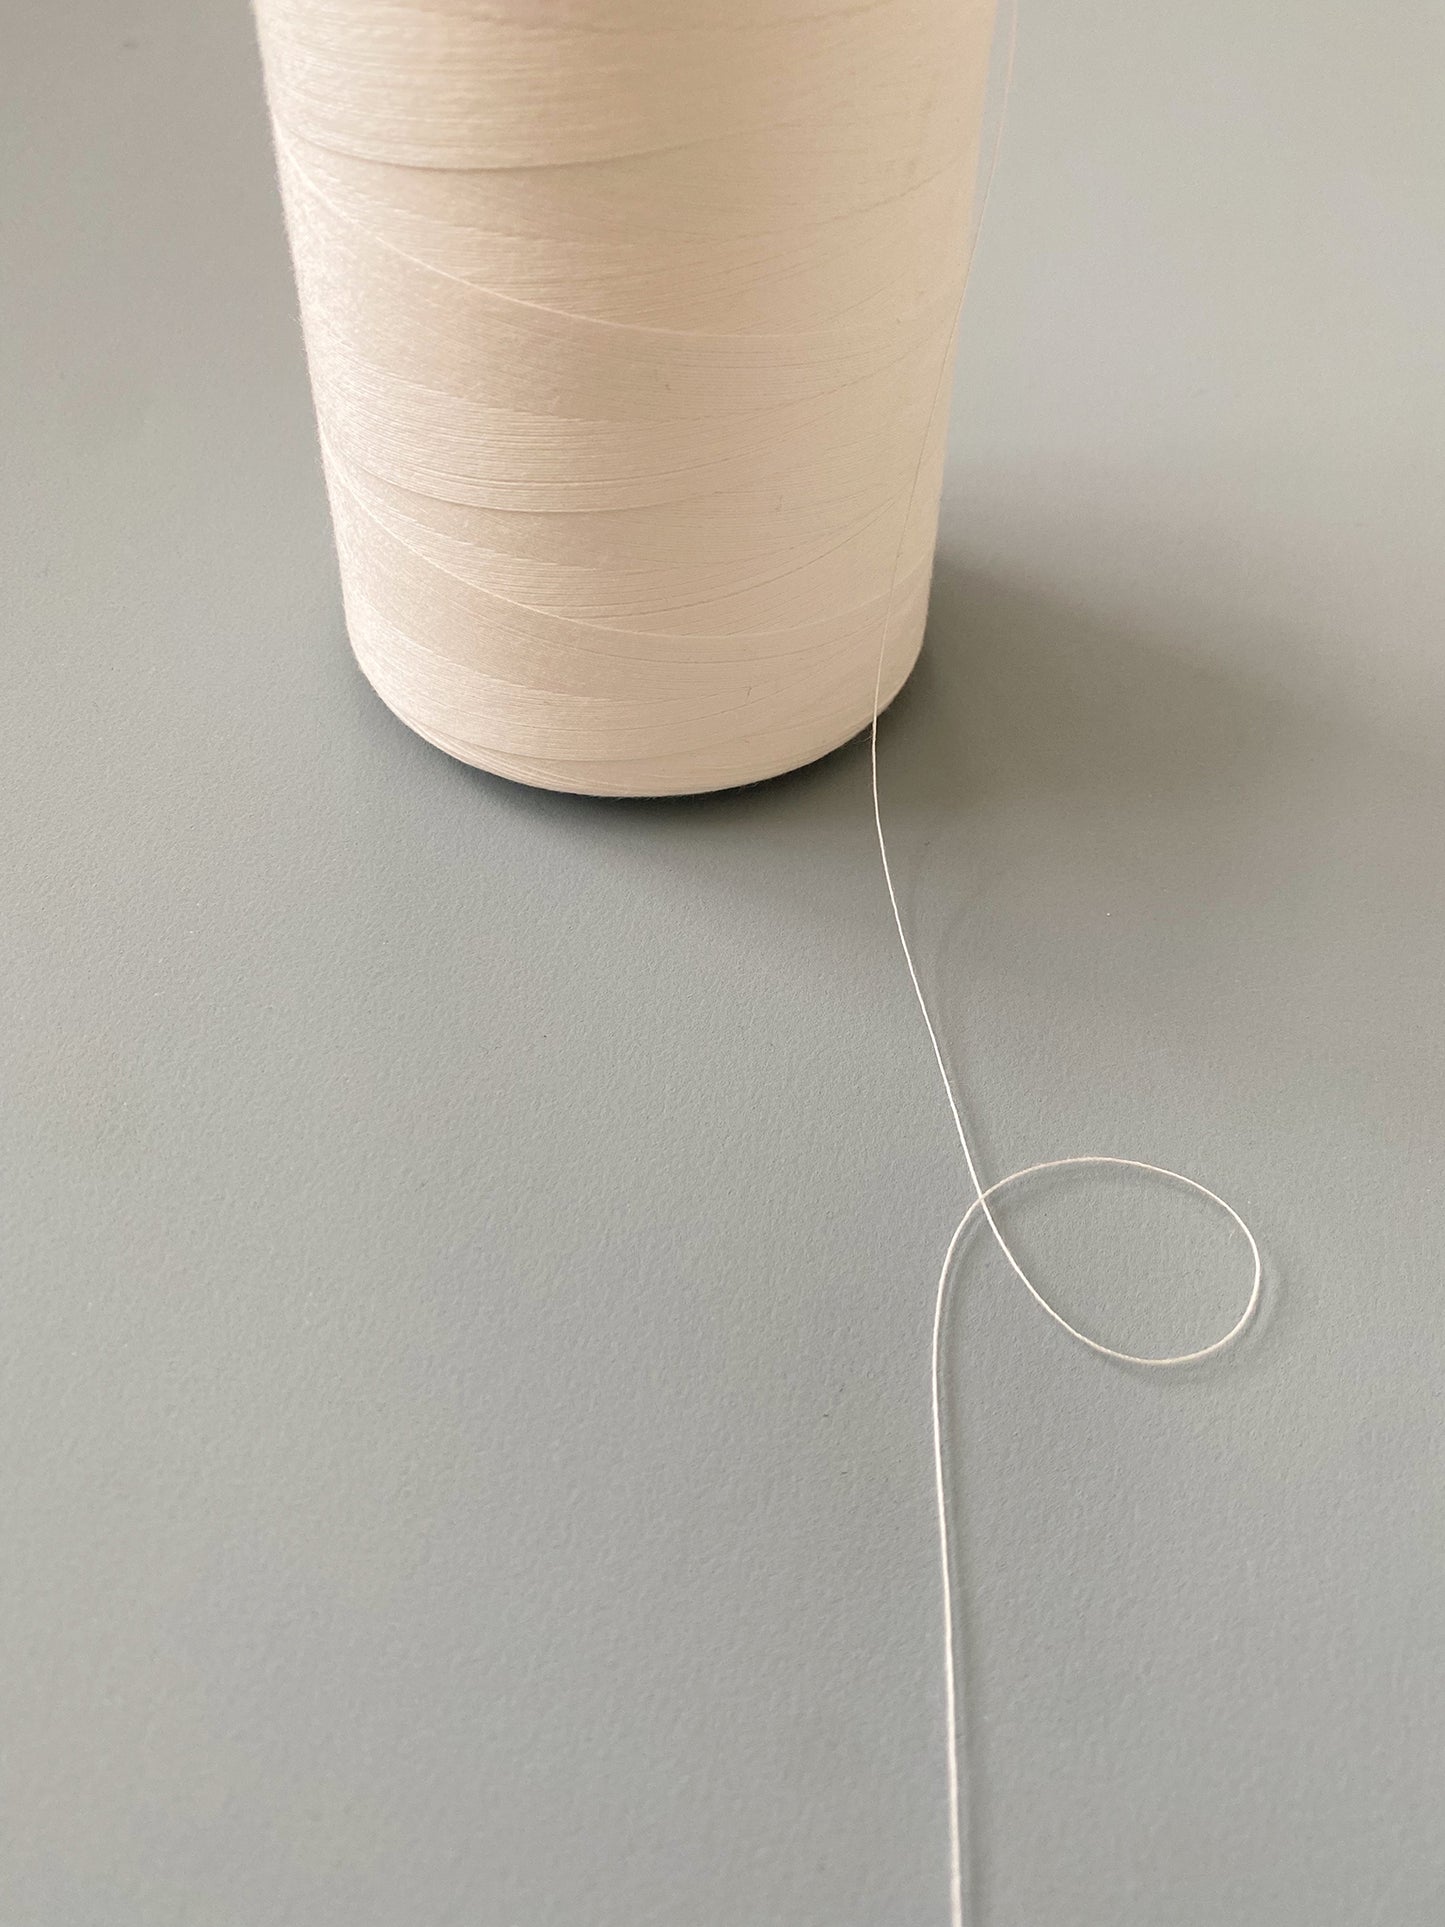 100% Tencel Biodegradable Sewing Thread White – Circular Factory